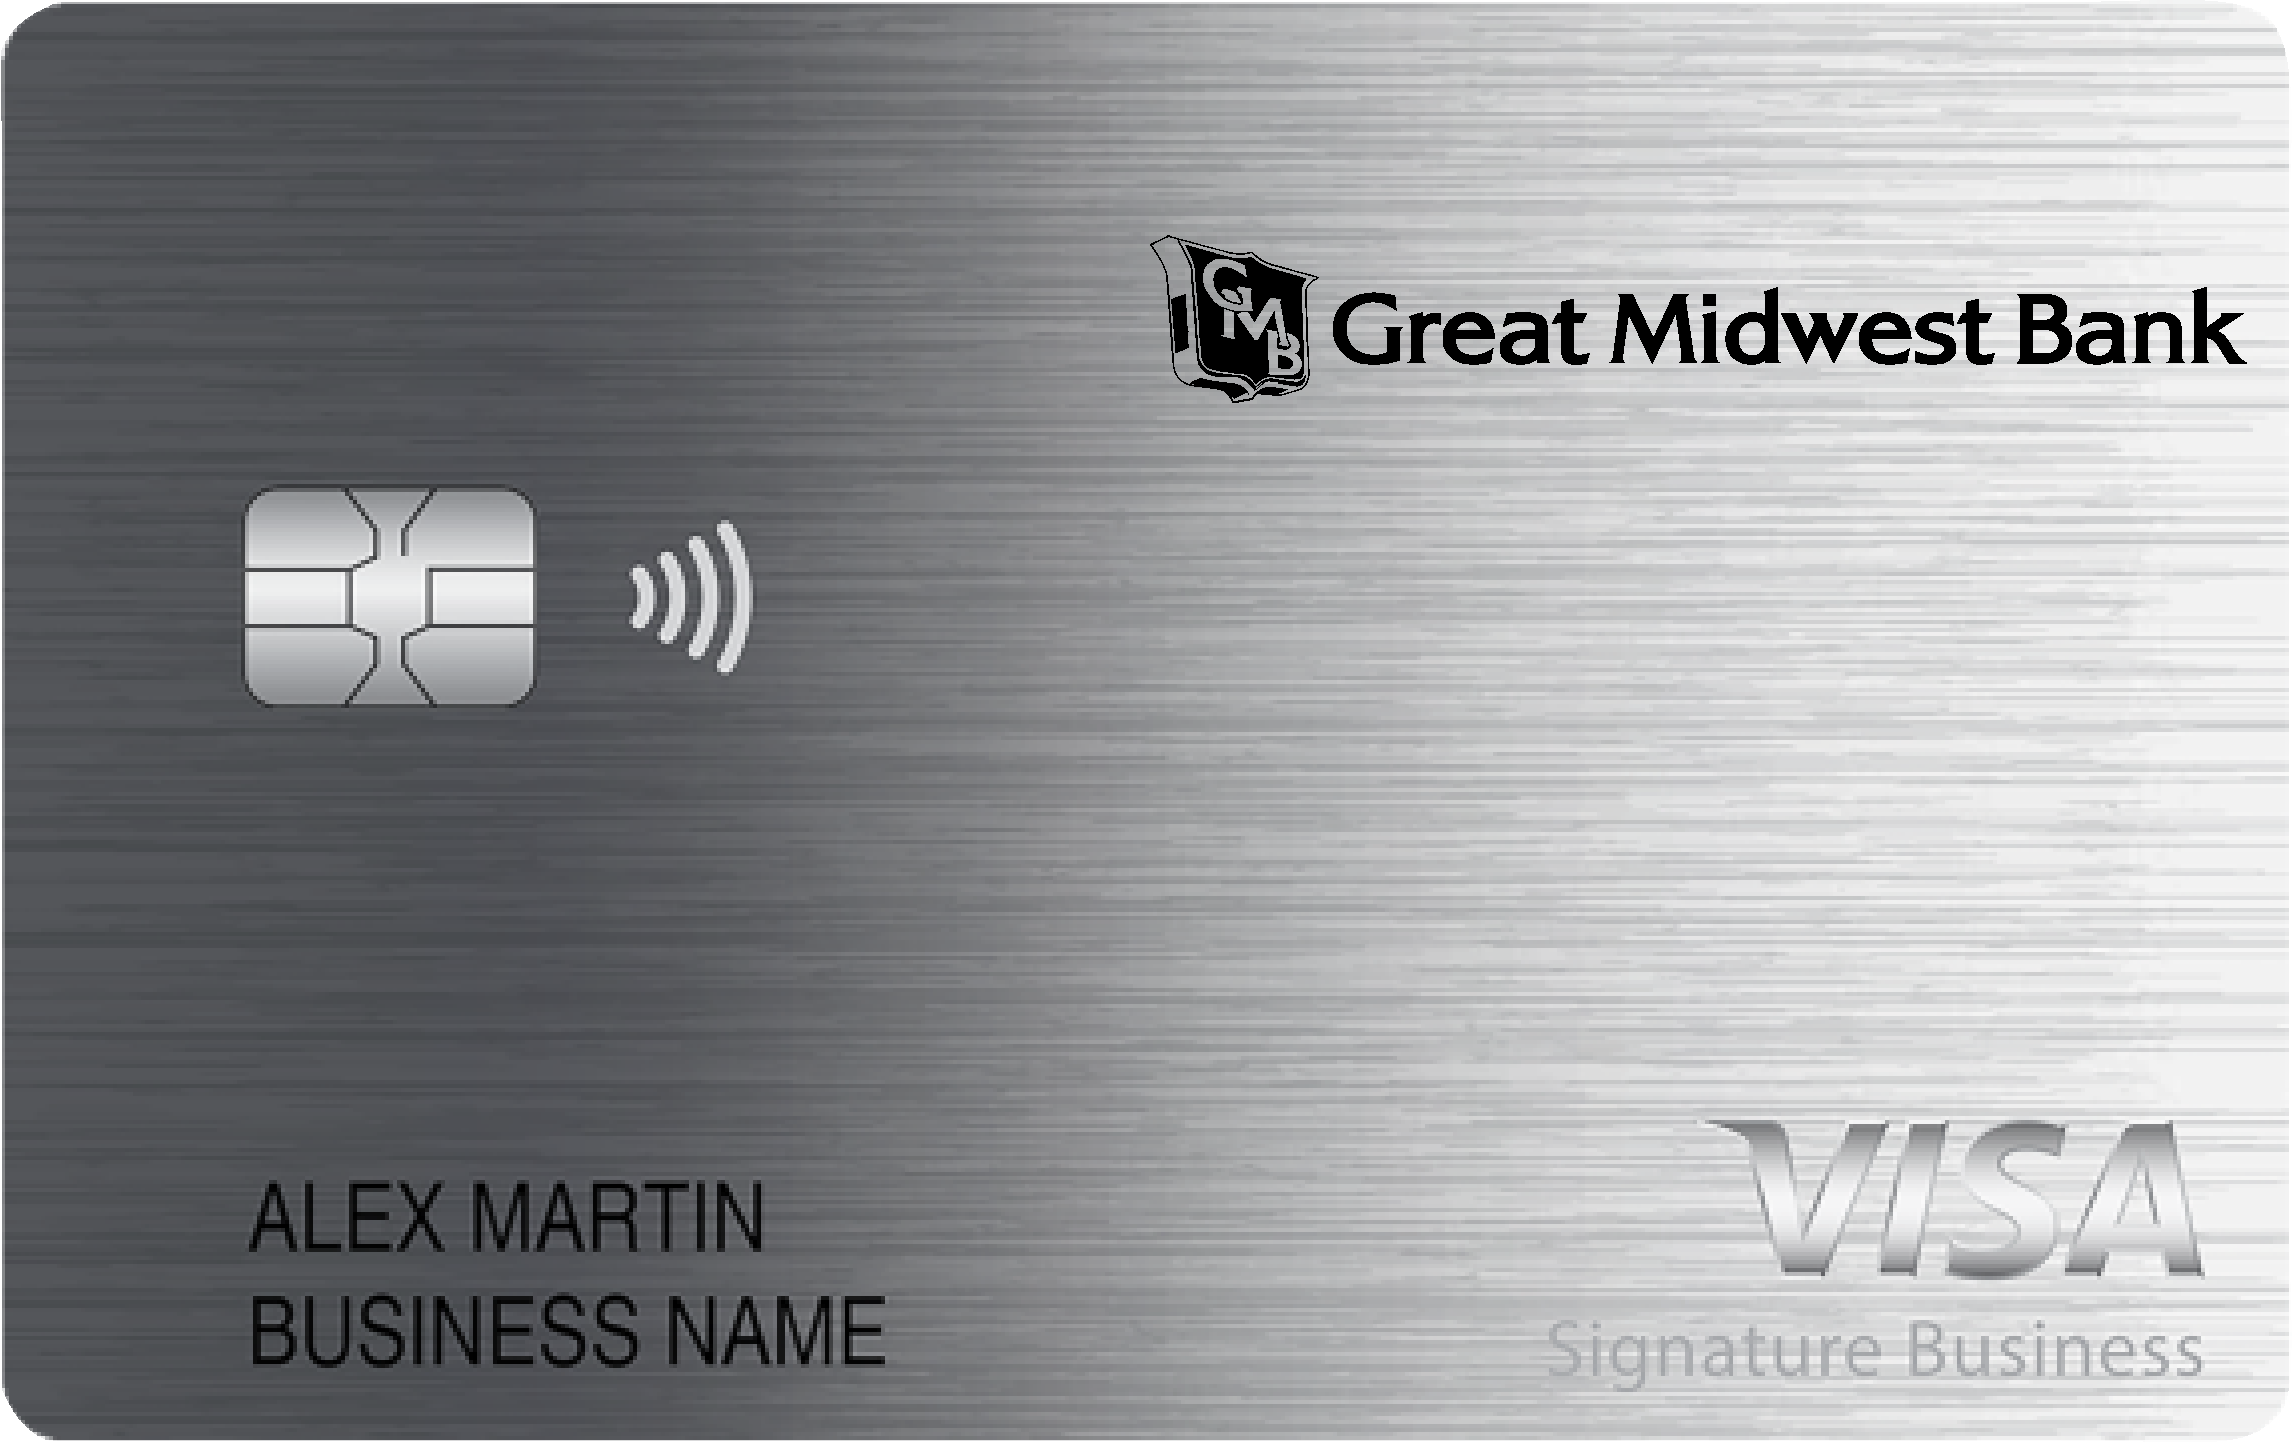 Great Midwest Bank Smart Business Rewards Card